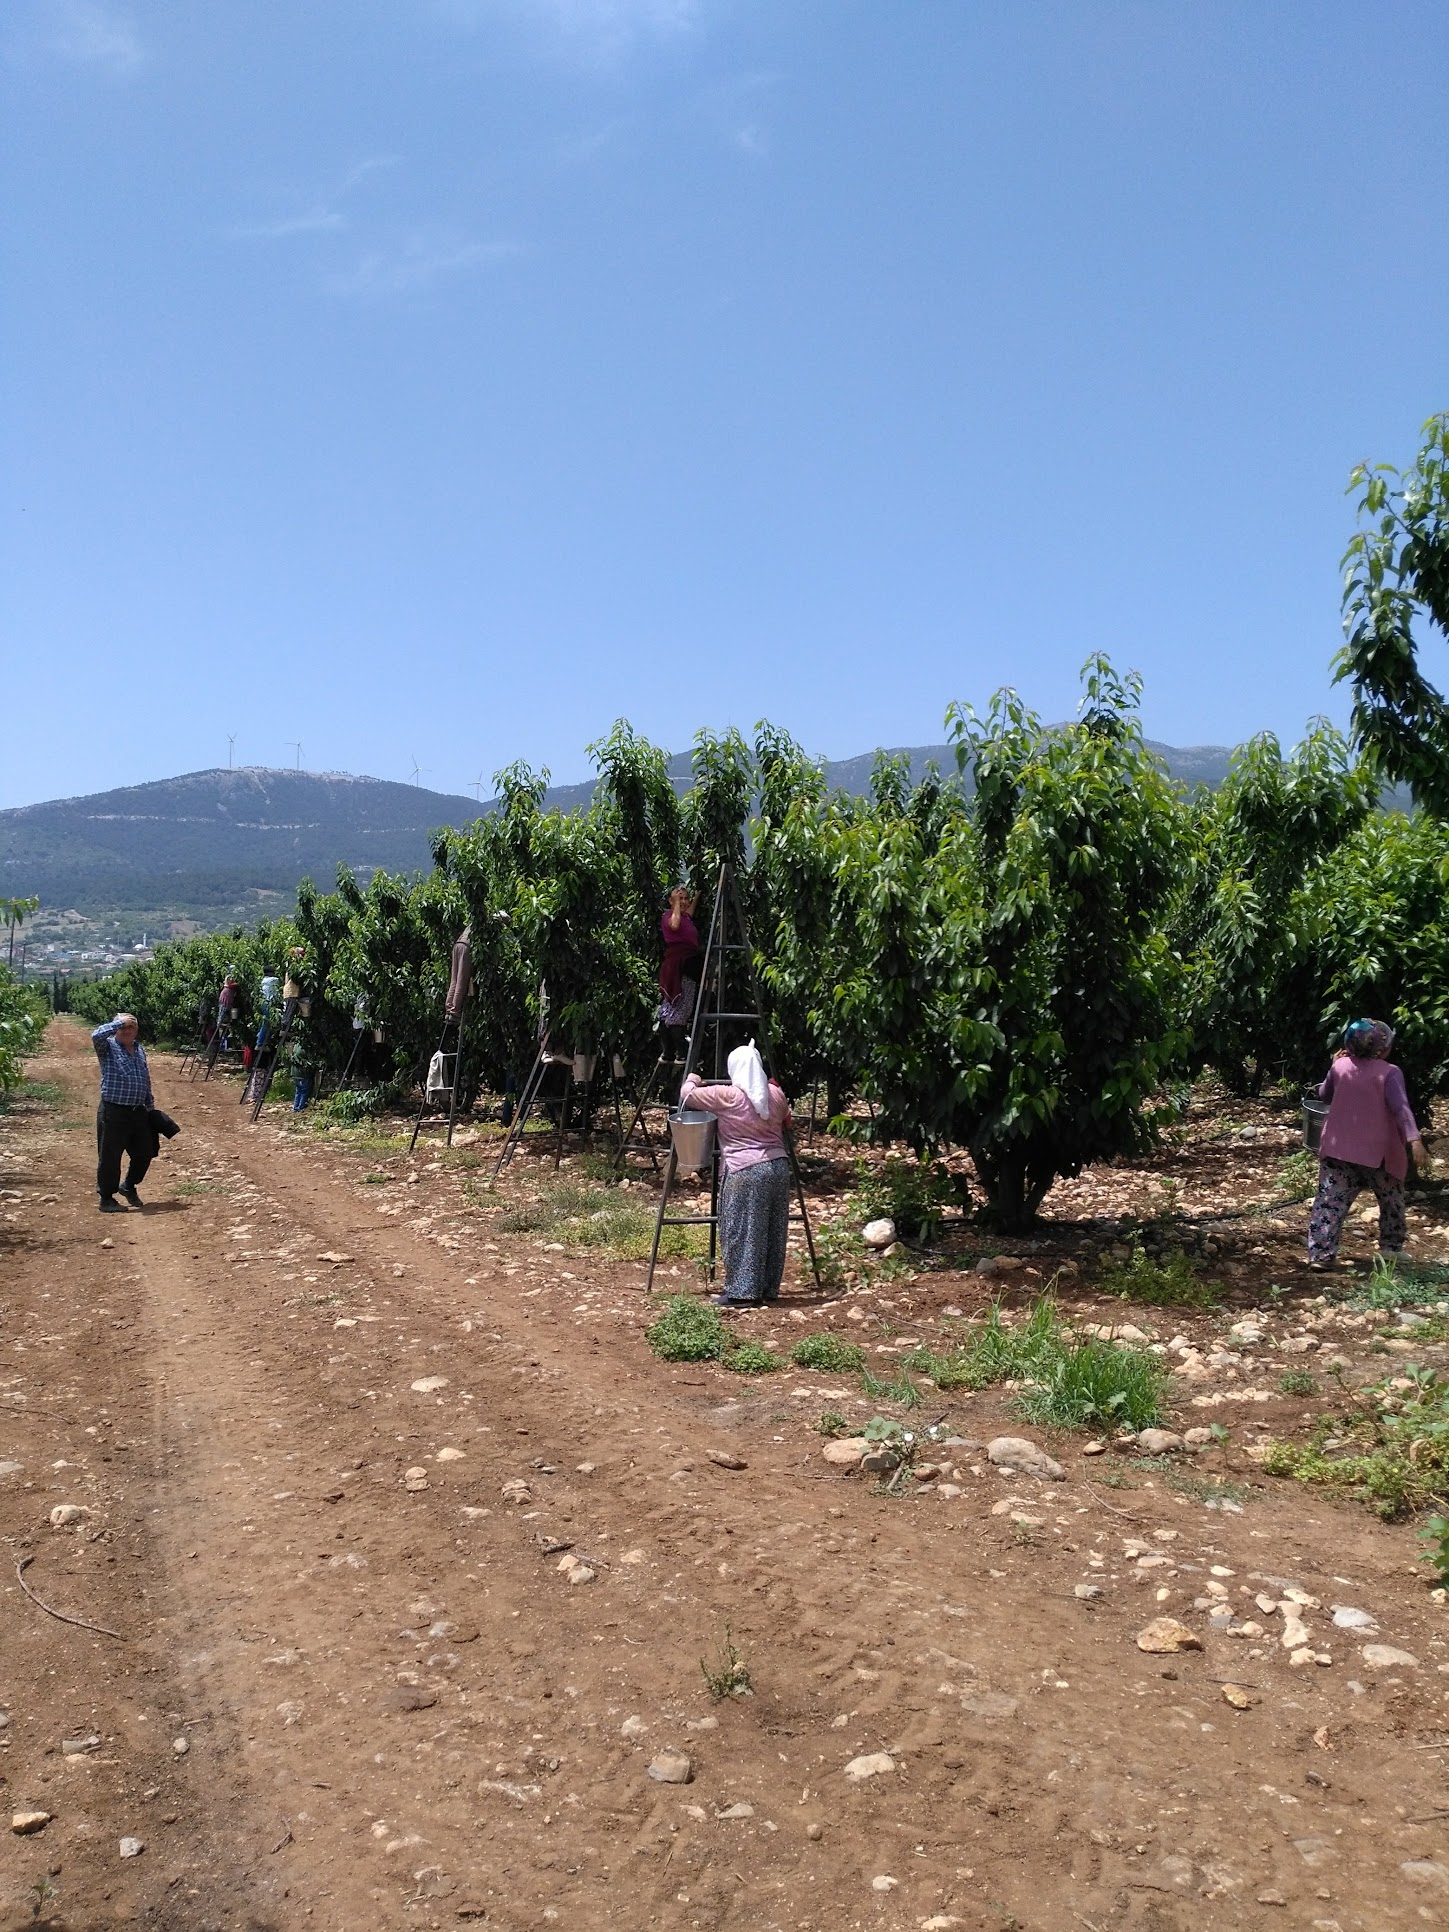 cherry trees being harvested in an orchard on a sunny dry day. there are one or two people per tree on six or seven trees. there are lots more trees in the back. each harvester has a ladder made from thin metal pipe, and metal buckets. each person is leaning into the tree to harvest.